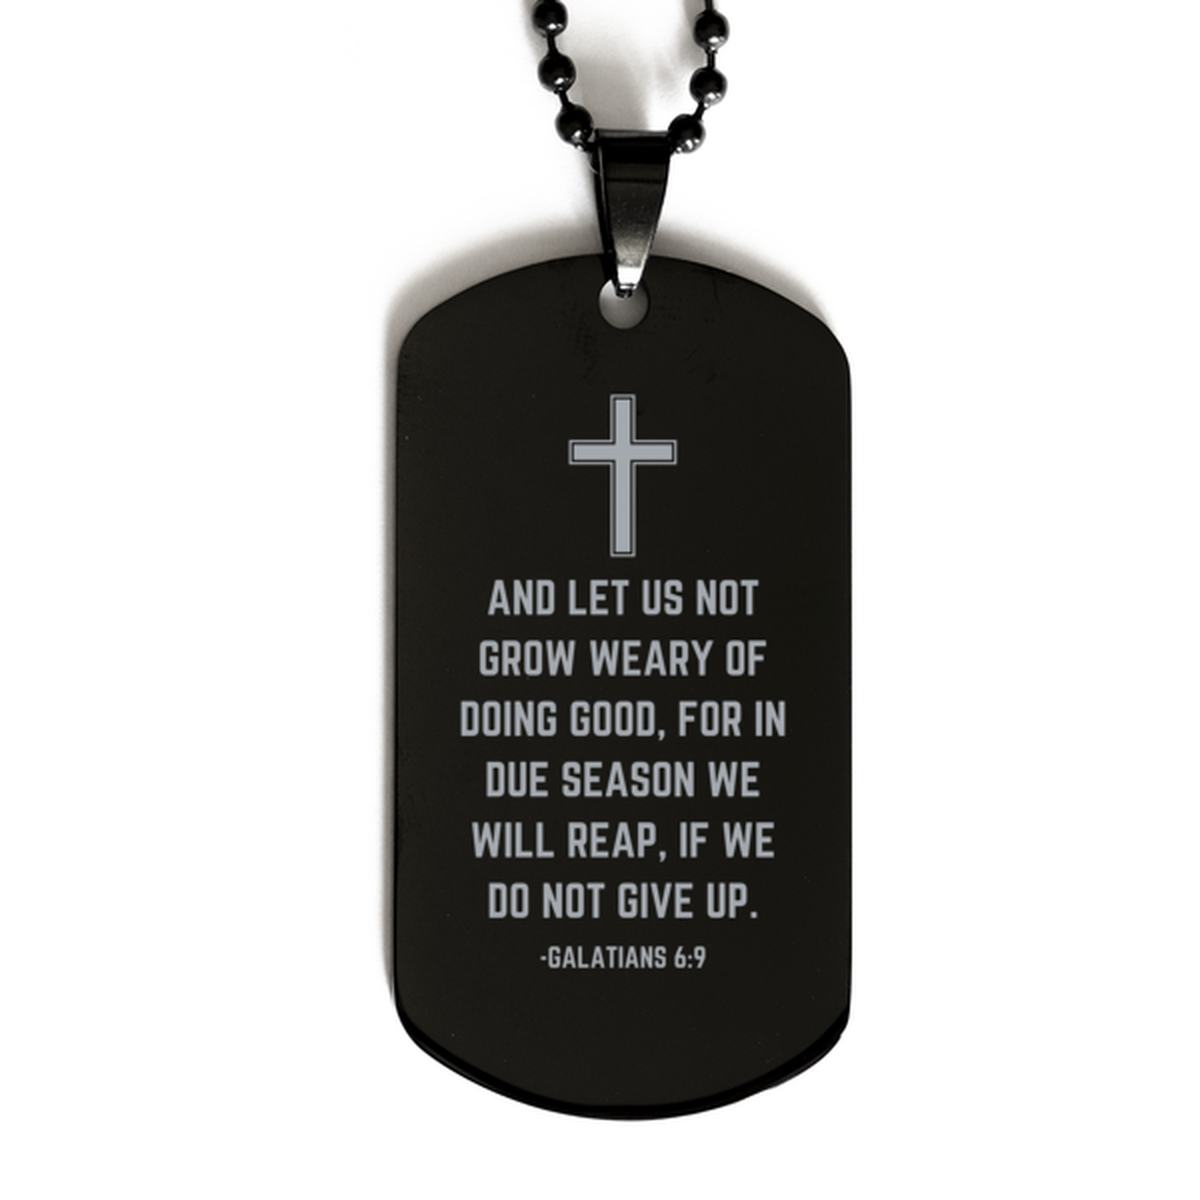 Baptism Gifts For Teenage Boys Girls, Christian Bible Verse Black Dog Tag, And let us not grow weary, Confirmation Gifts, Bible Verse Necklace for Son, Godson, Grandson, Nephew